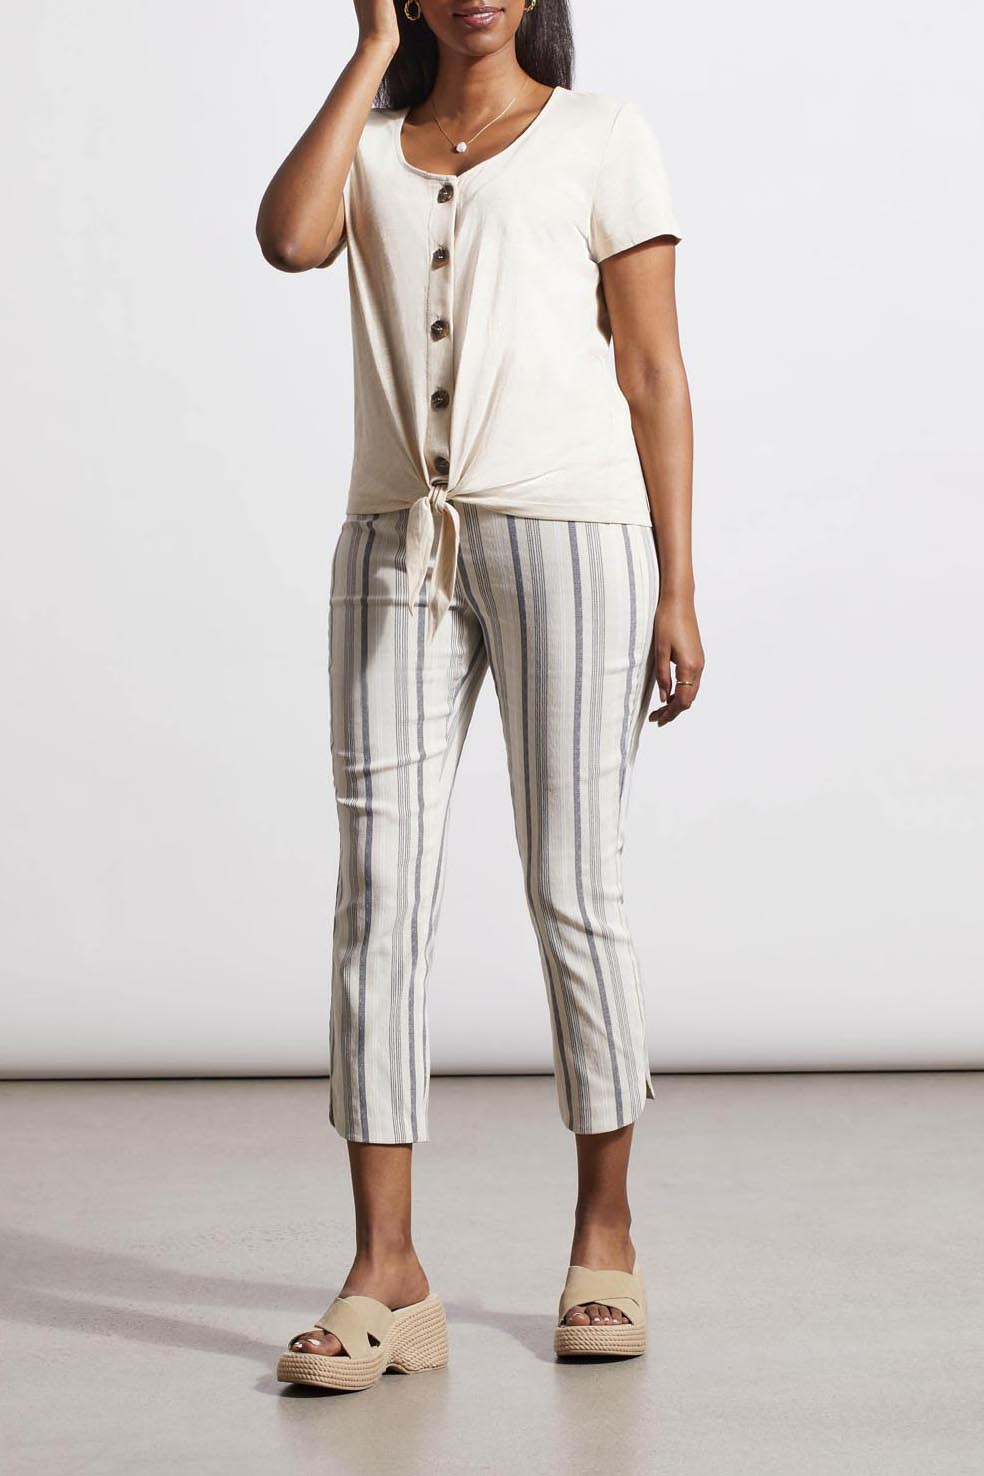 Woman in a versatile style, beige Tribal Button Knot Hem Top and striped trousers.